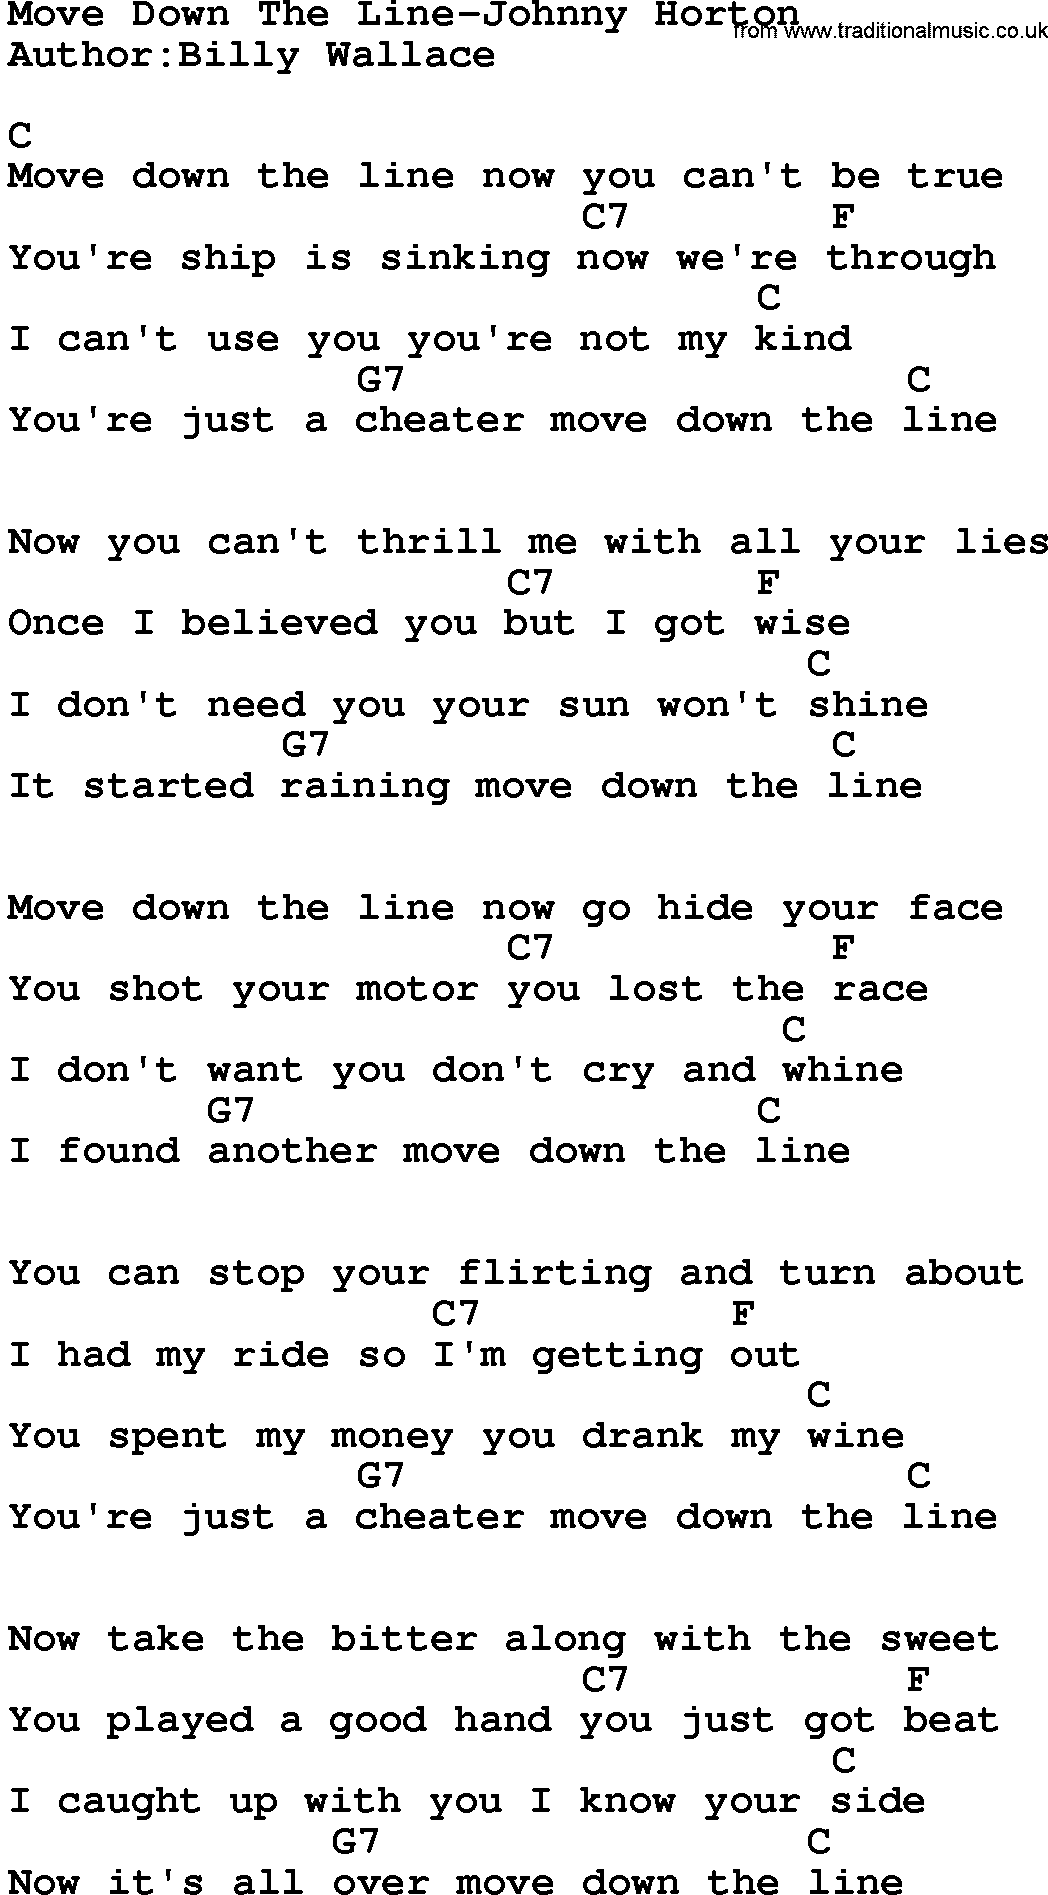 Country music song: Move Down The Line-Johnny Horton lyrics and chords